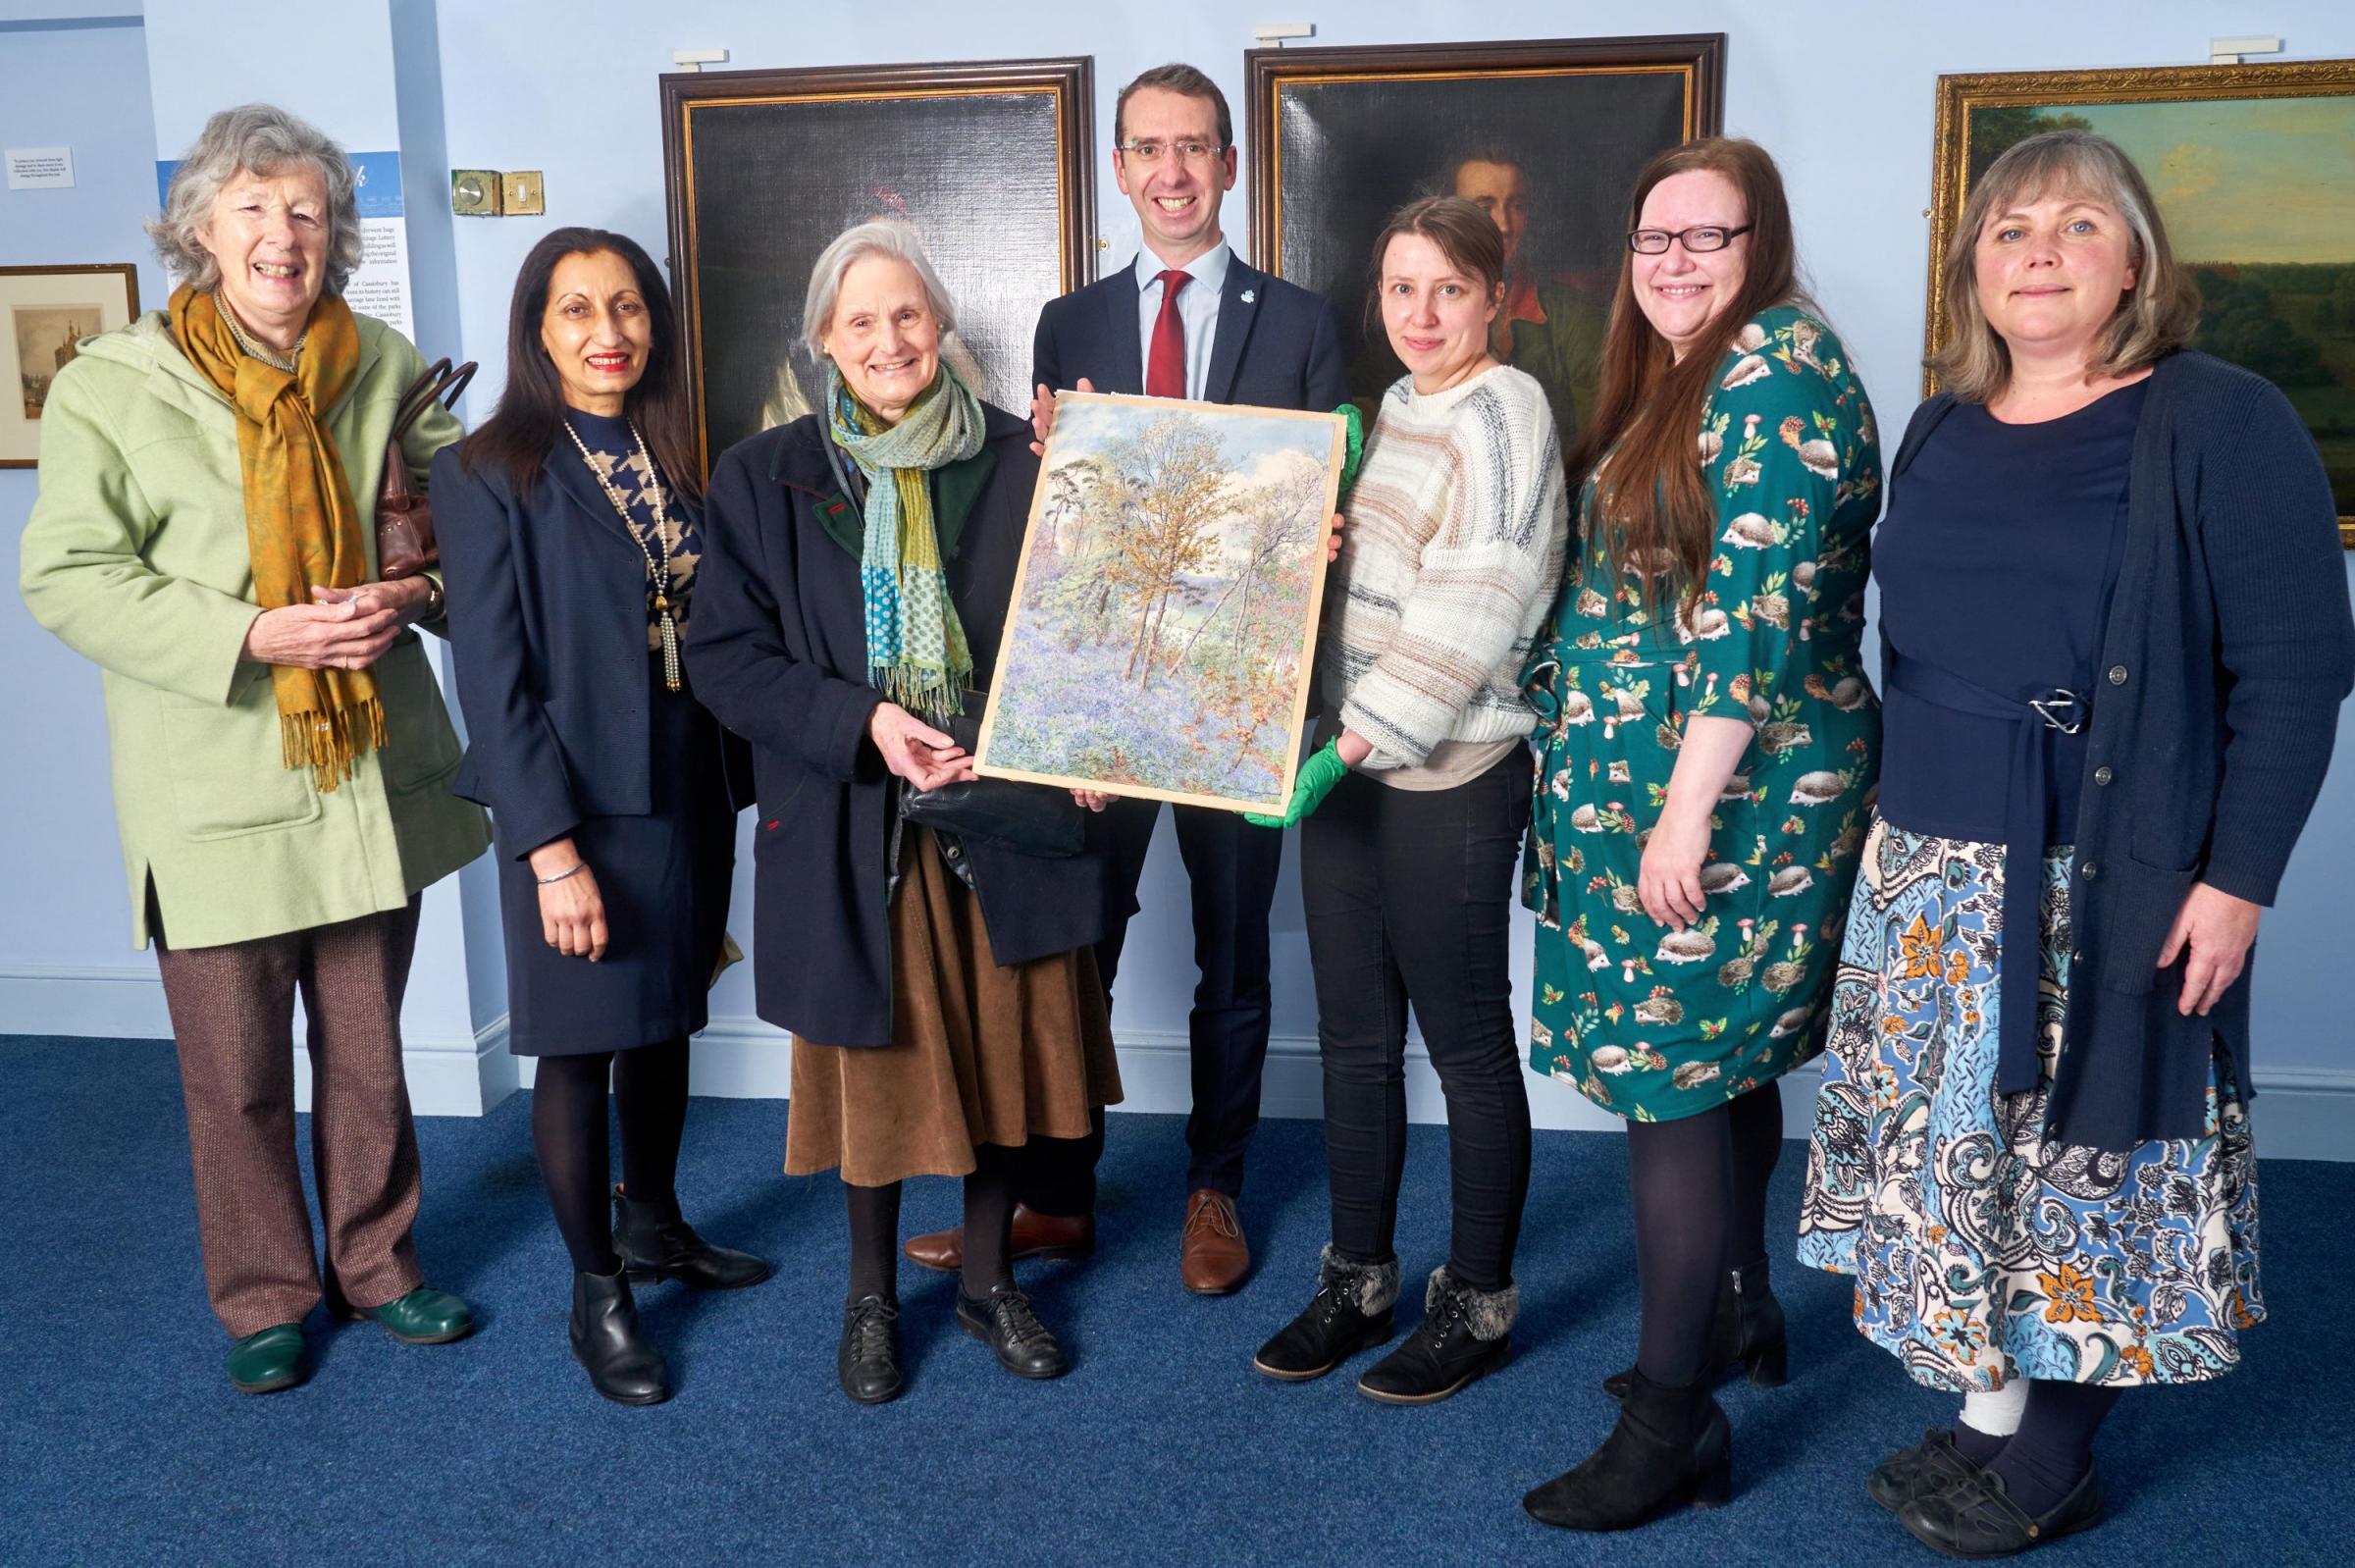 Mayor Peter Taylor with Museum Curator Sarah Priestley and representatives from Friends of Watford Musuem and Hertfordshire Heritage Fund